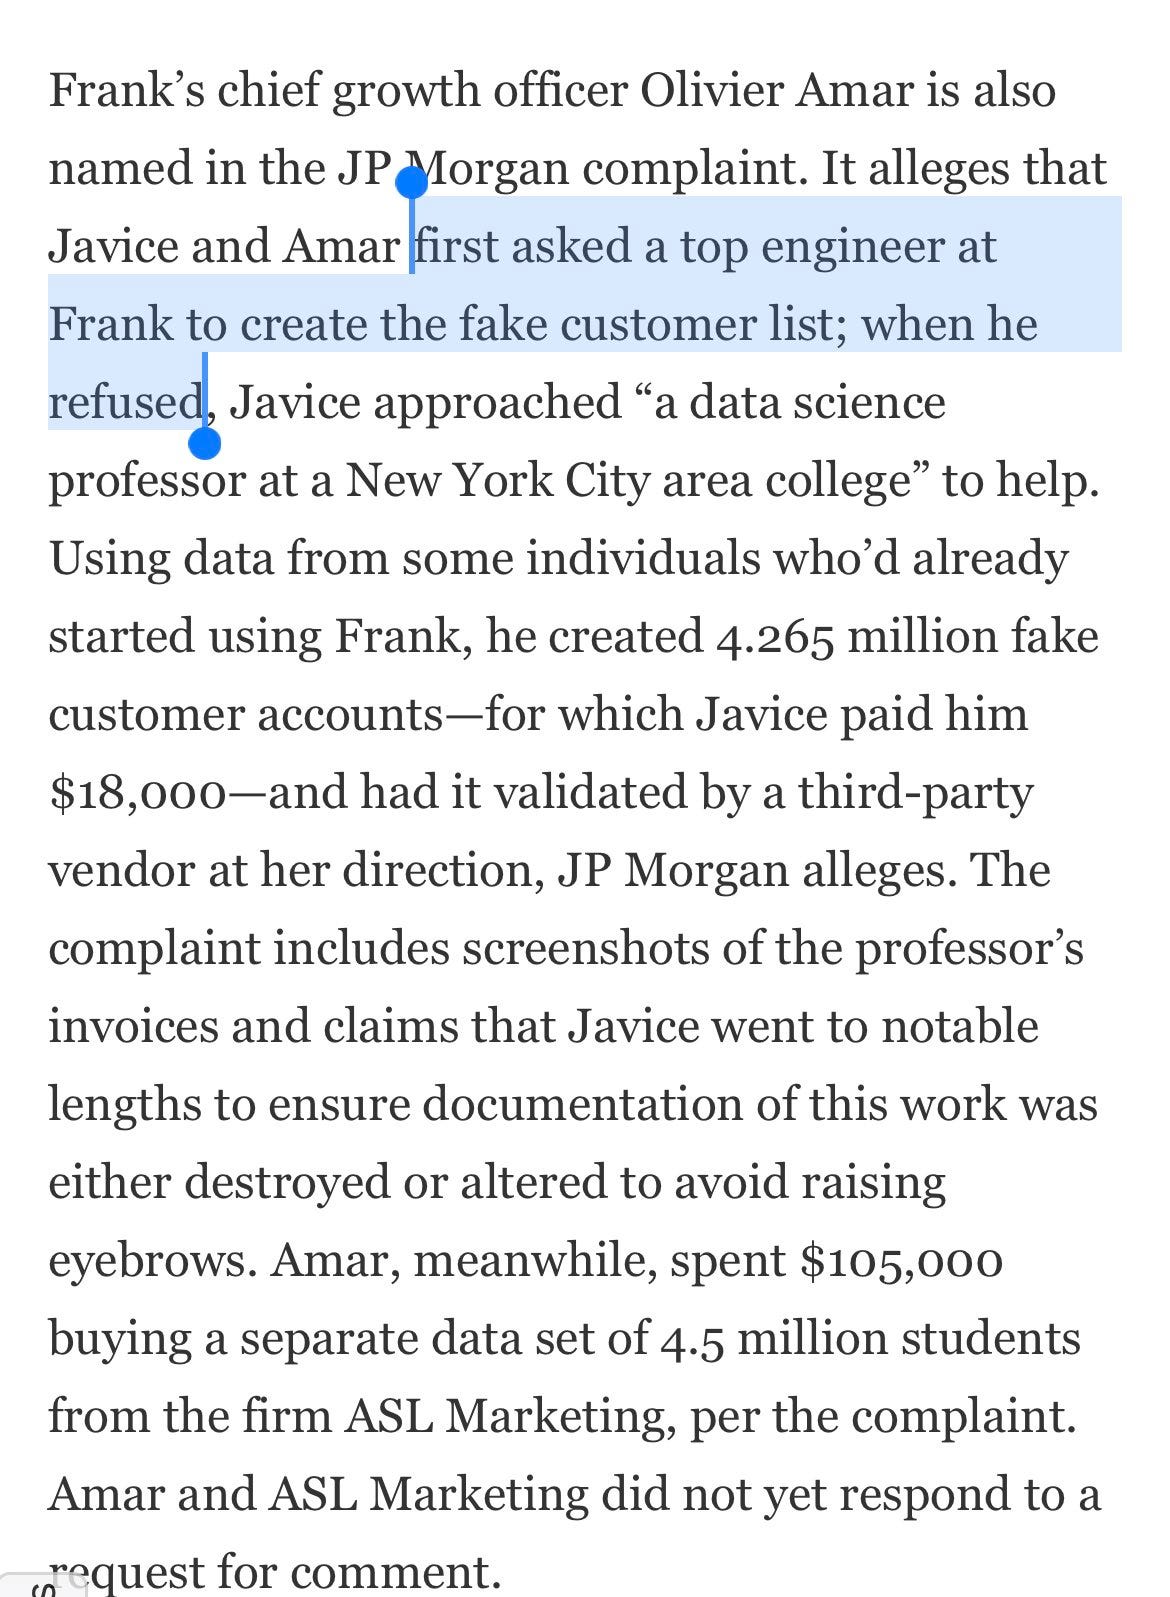 Frank’s chief growth officer Olivier Amar is also named in the JP Morgan complaint. It alleges that Javice and Amar first asked a top engineer at Frank to create the fake customer list; when he refused, Javice approached “a data science professor at a New York City area college” to help. Using data from some individuals who’d already started using Frank, he created 4.265 million fake customer accounts—for which Javice paid him $18,000—and had it validated by a third-party vendor at her direction, JP Morgan alleges. The complaint includes screenshots of the professor’s invoices and claims that Javice went to notable lengths to ensure documentation of this work was either destroyed or altered to avoid raising eyebrows. Amar, meanwhile, spent $105,000 buying a separate data set of 4.5 million students from the firm ASL Marketing, per the complaint. Amar and ASL Marketing did not yet respond to a request for comment.